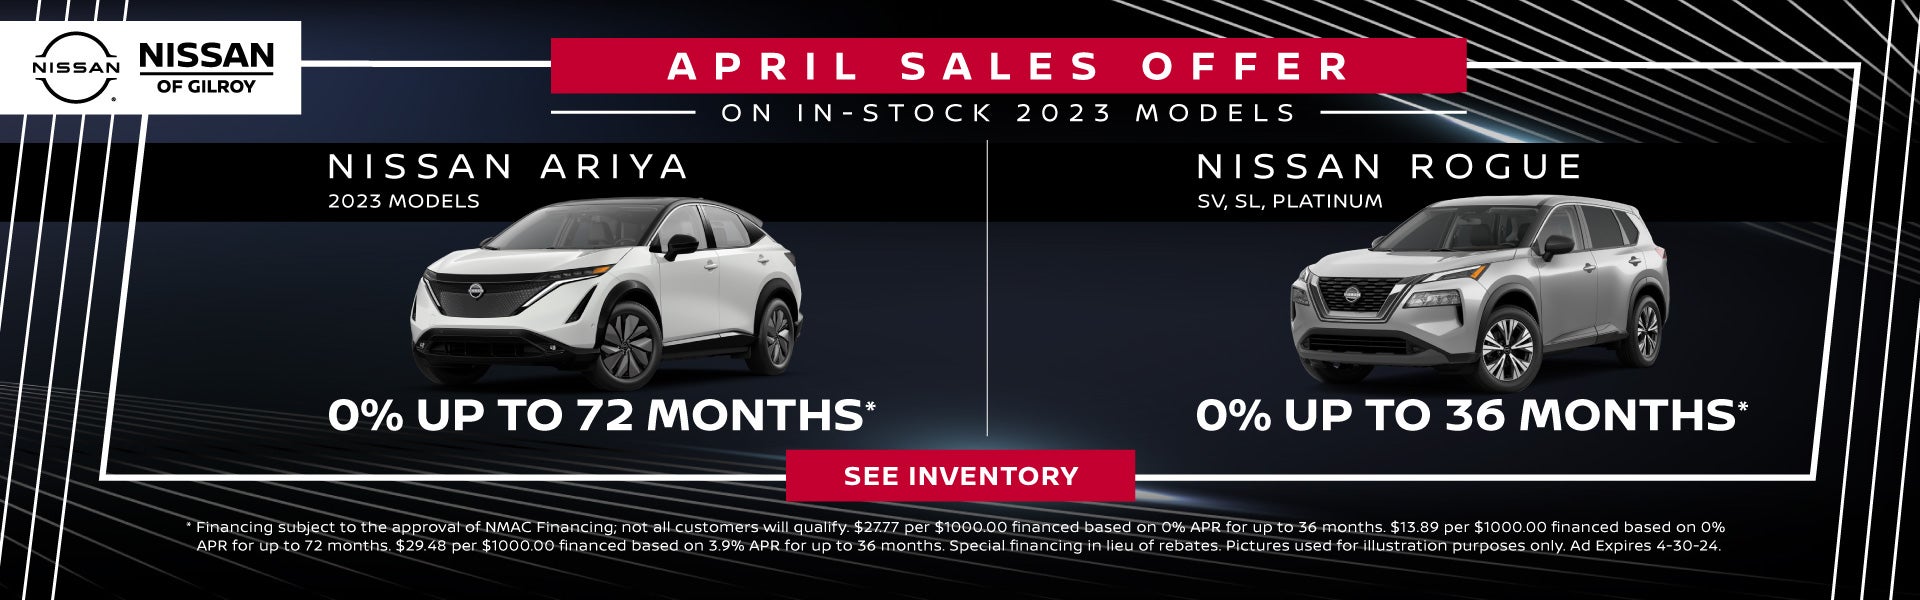 April Sales Offer on 2023 ARIYA and Rogue Models